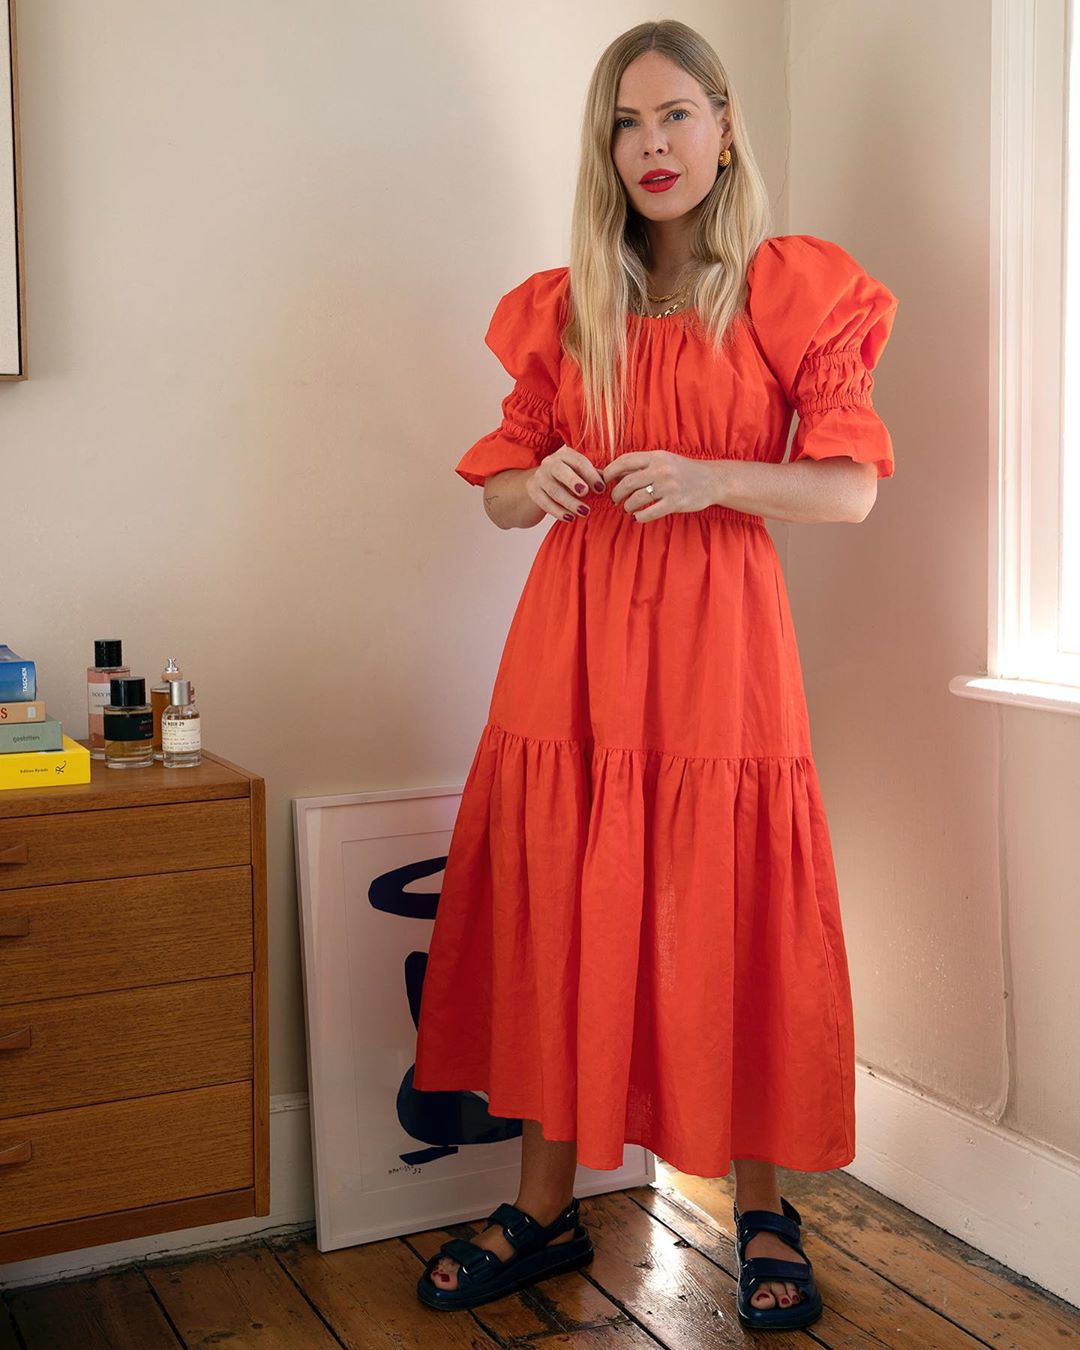 21 Red Dresses To Buy Now and Wear Forever